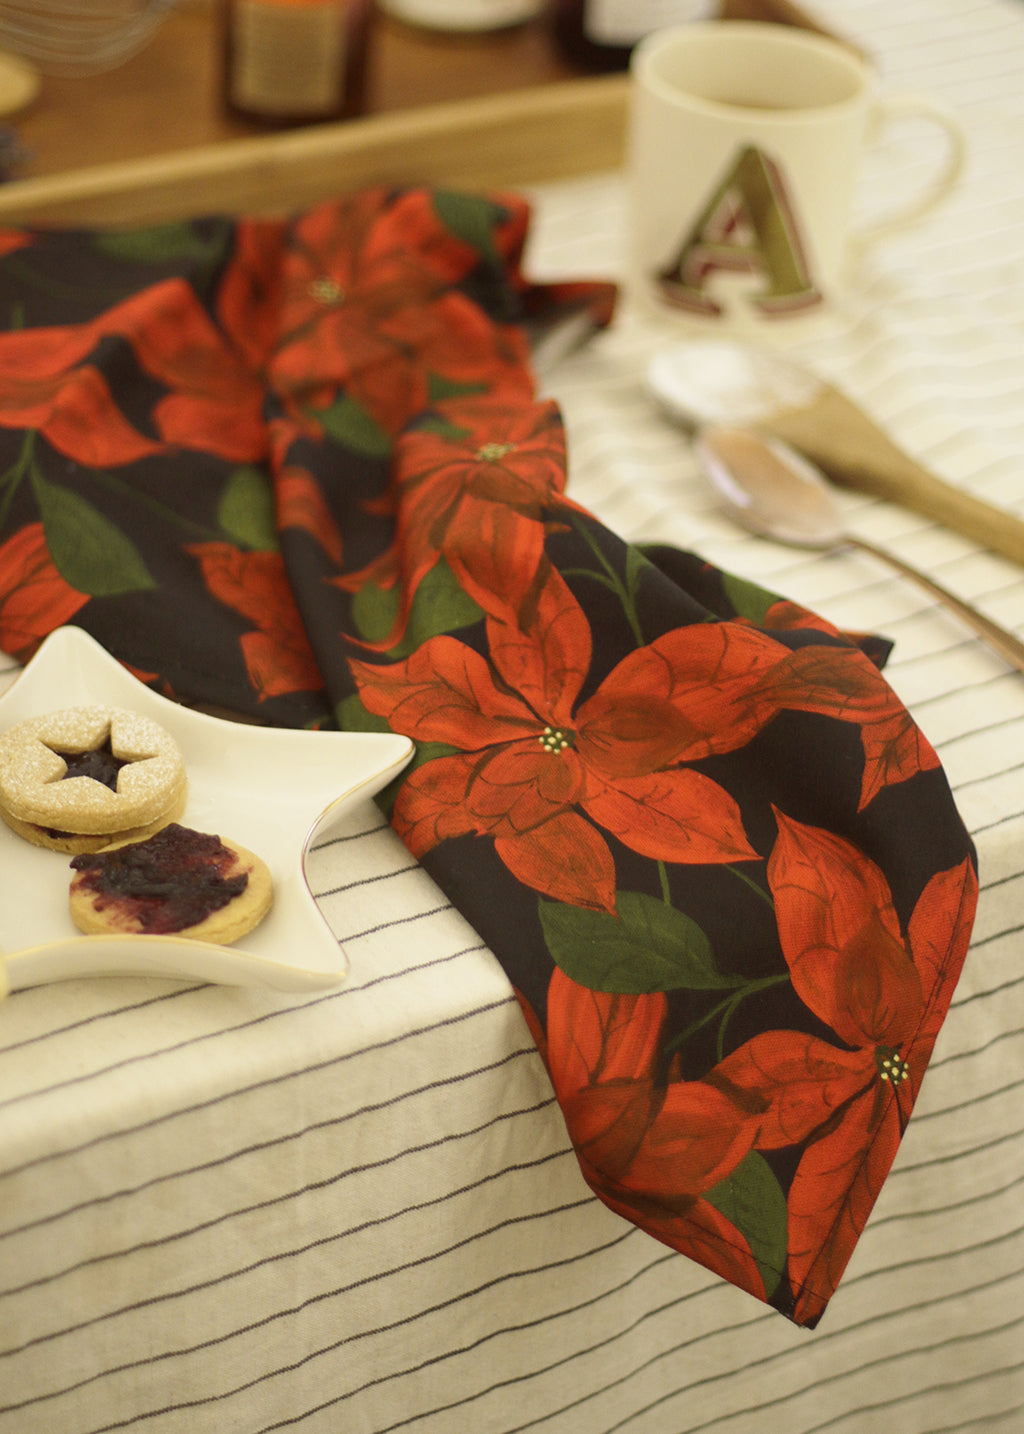 A cotton teatowel with a black and red poinsettia patterned print, on a christmassy table